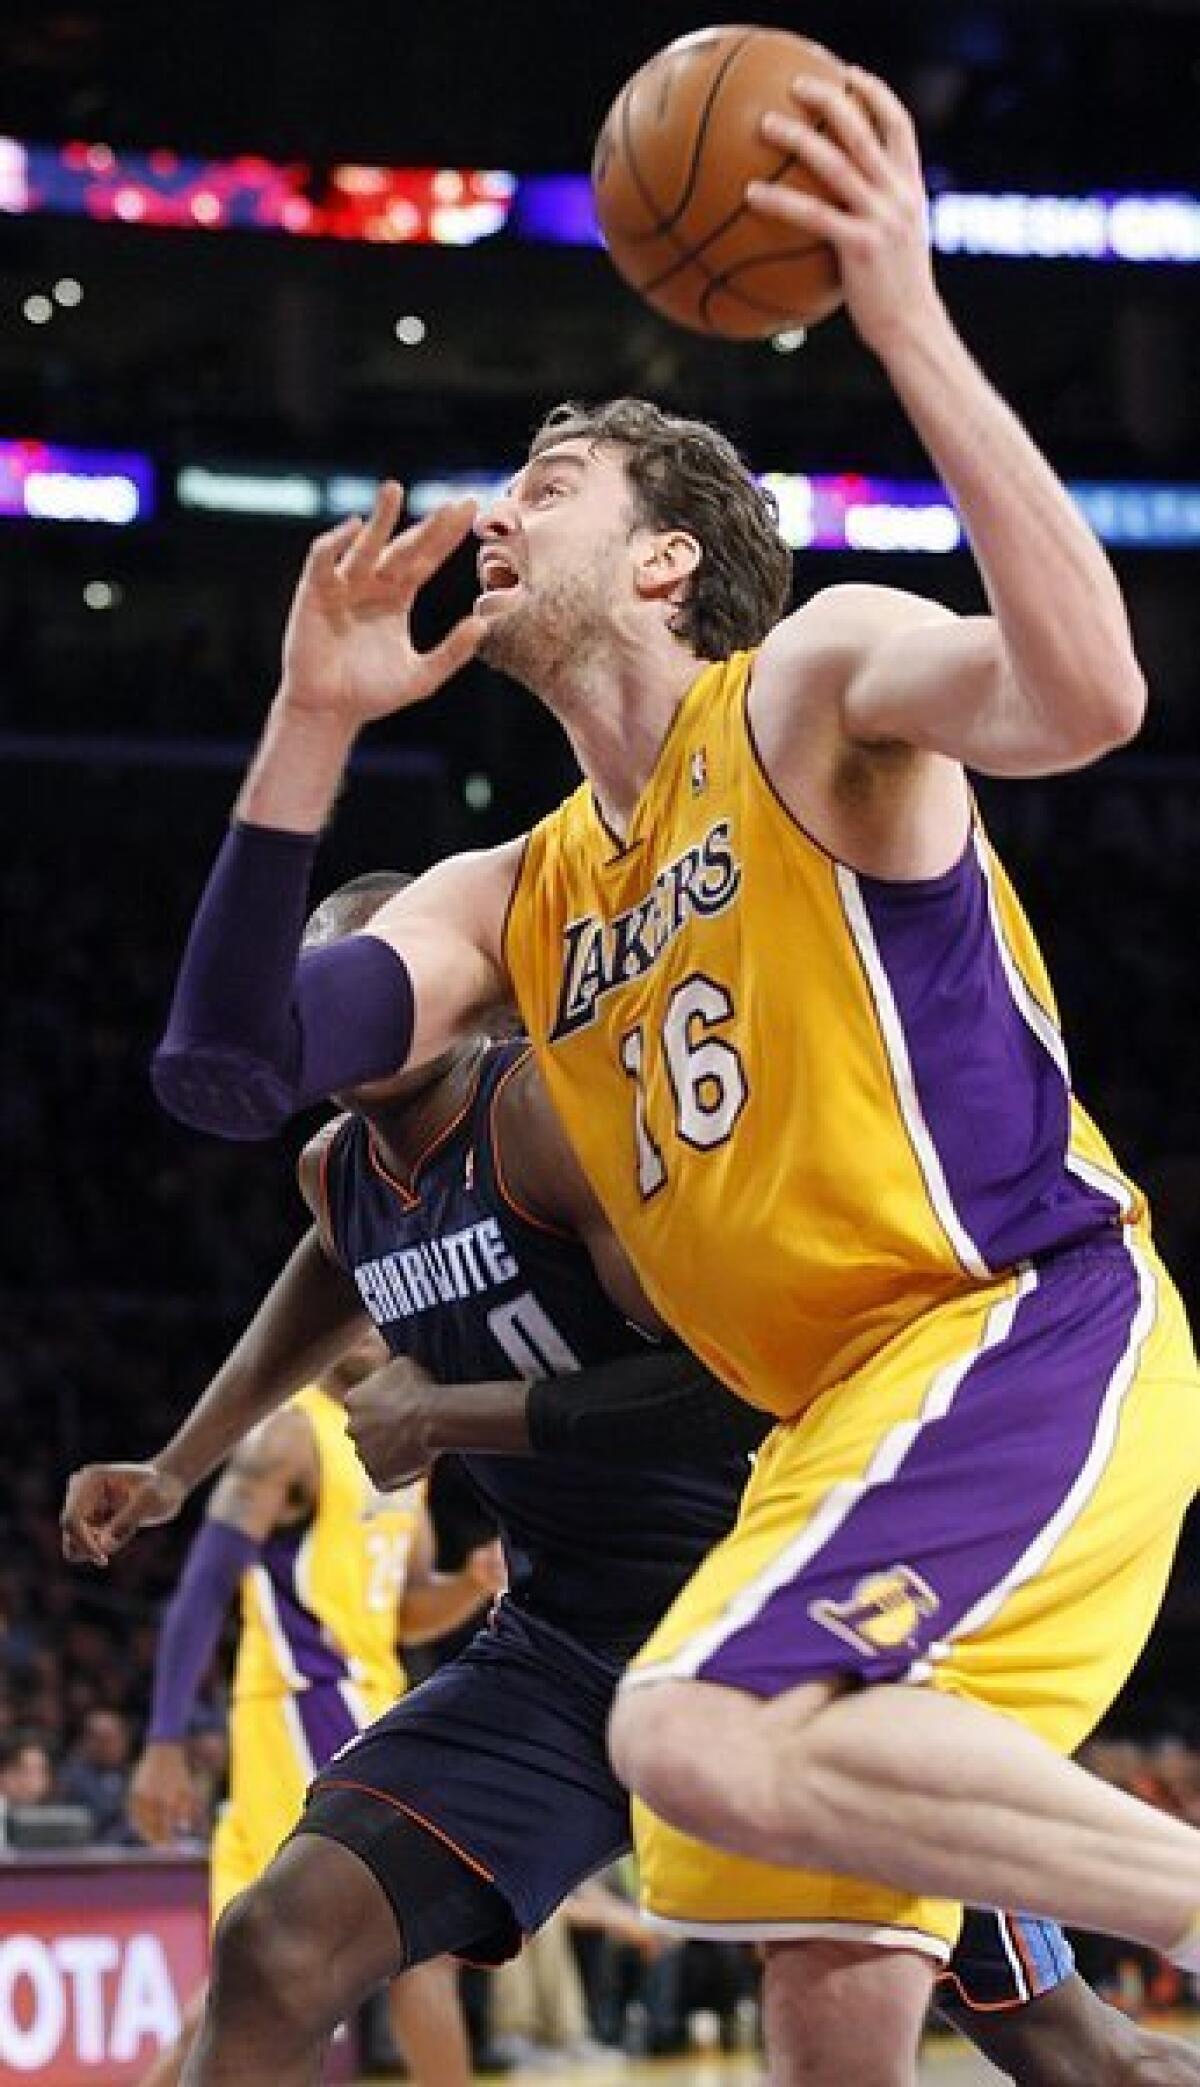 Pau Gasol drives to the basket against the Bobcats.